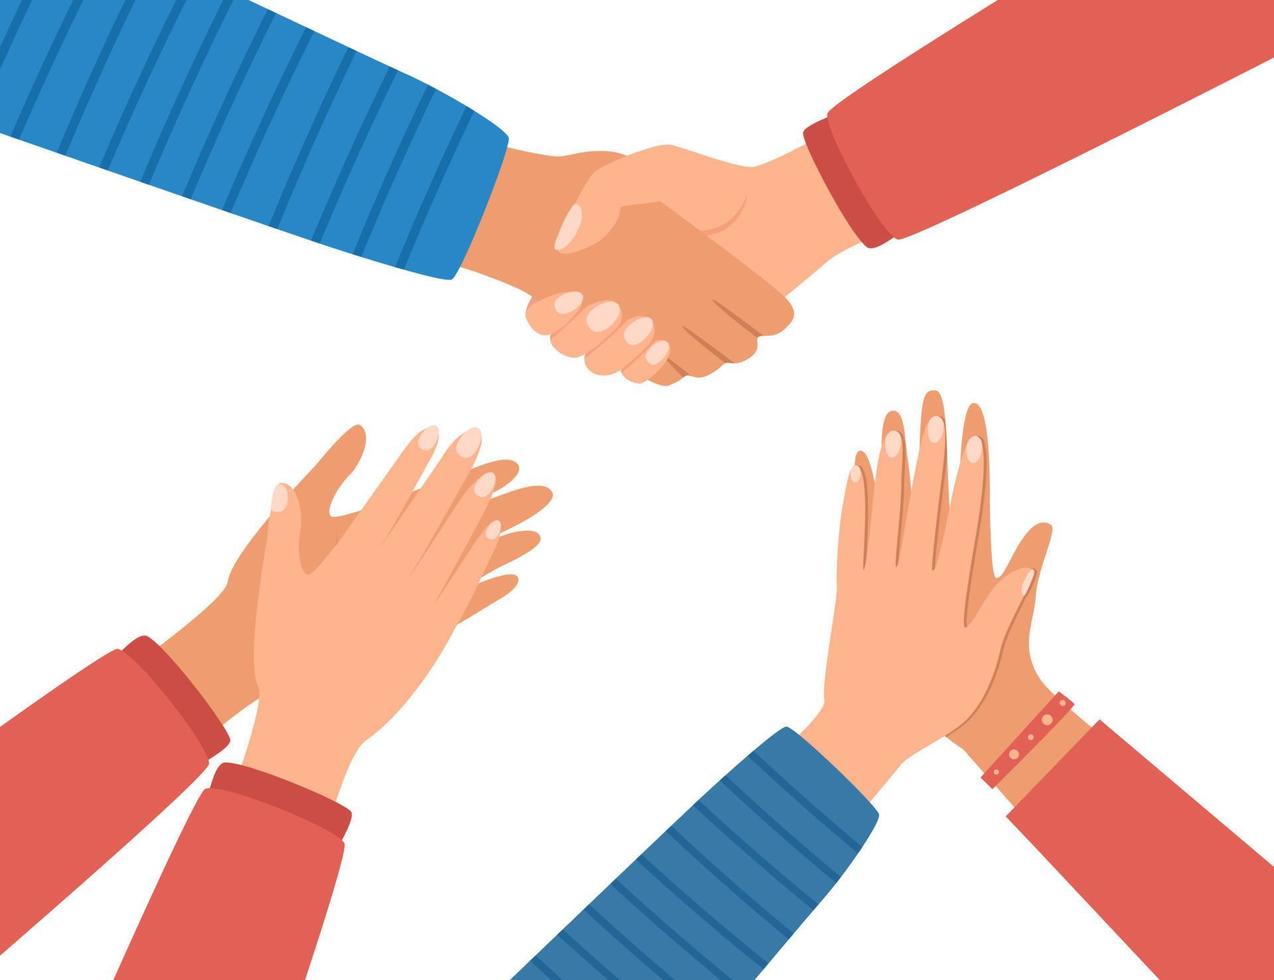 Shaking, clapping, applauding hands. Handshake. High five gesture. Symbol of success deal, partnership, greeting, teamwork, friendship, unity, help,support, community. Vector illustration.